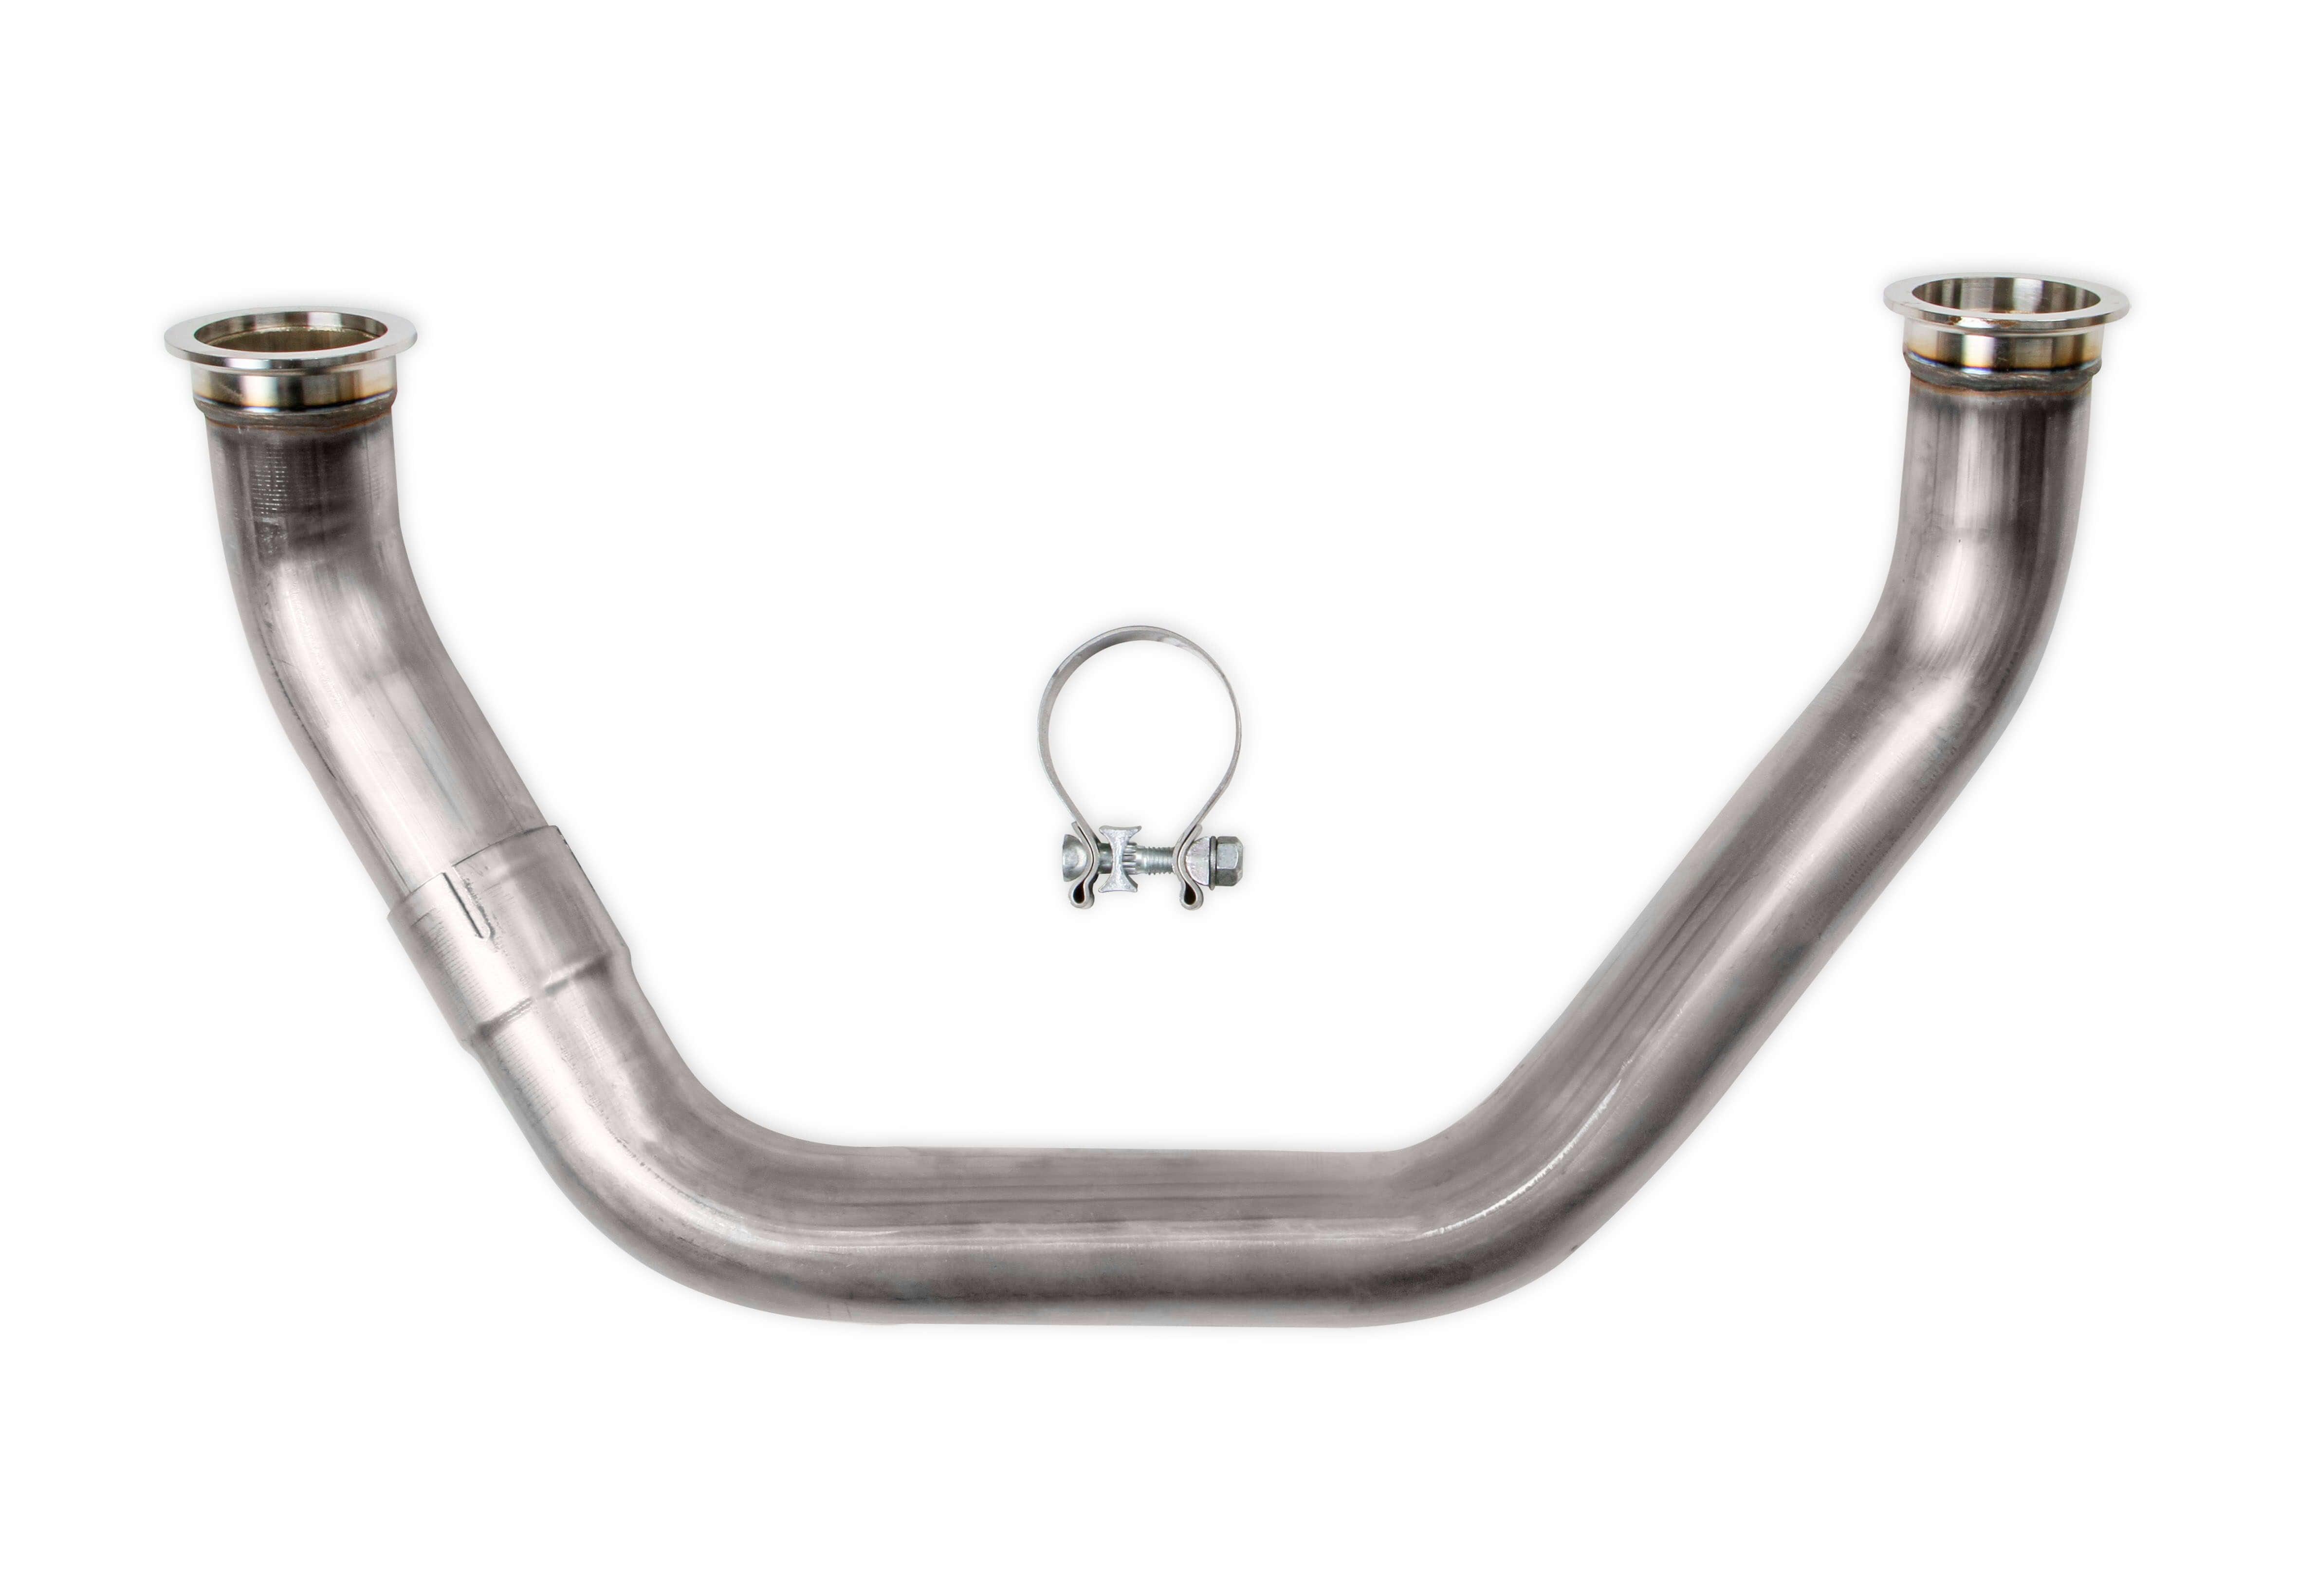 LS Turbo Crossover Tube Fits GM TH350/TH400/PG - Burlile Performance Products